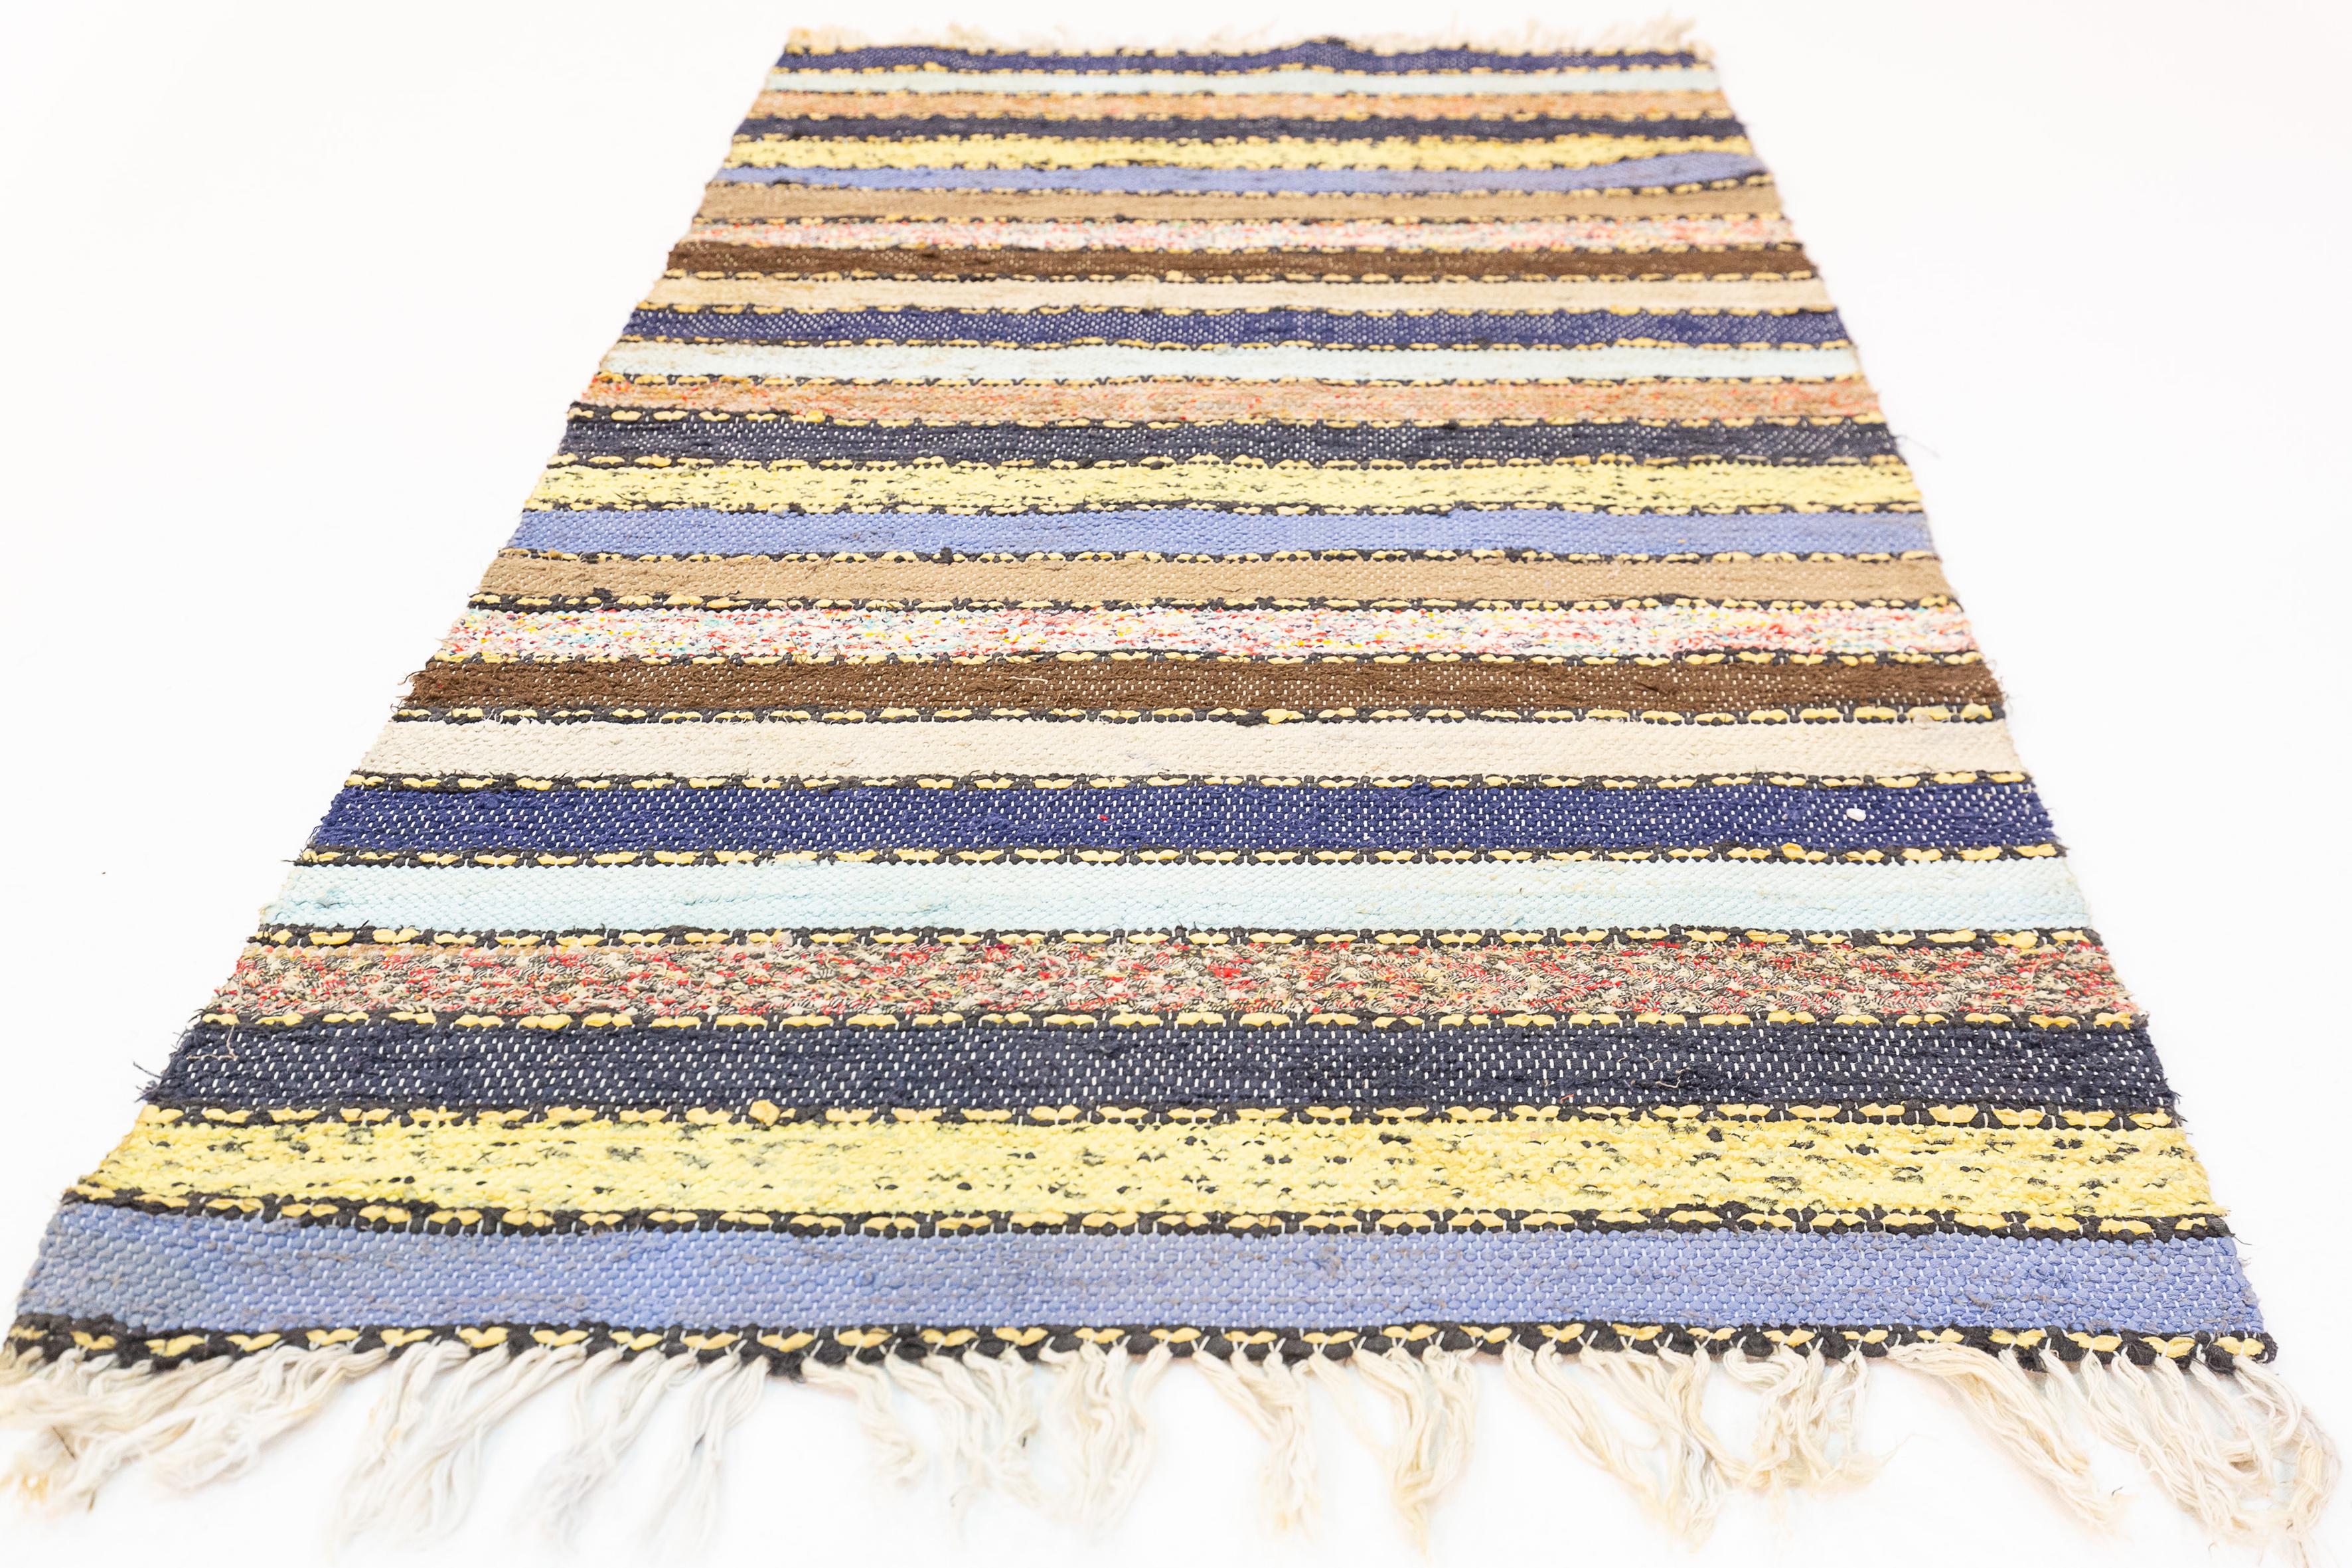 This piece is a Swedish flatweave rug, commonly known as a 'trasmatta', showcasing the traditional and resourceful craftsmanship of Scandinavian textile art. The rug features a series of horizontal stripes in a muted yet diverse palette that